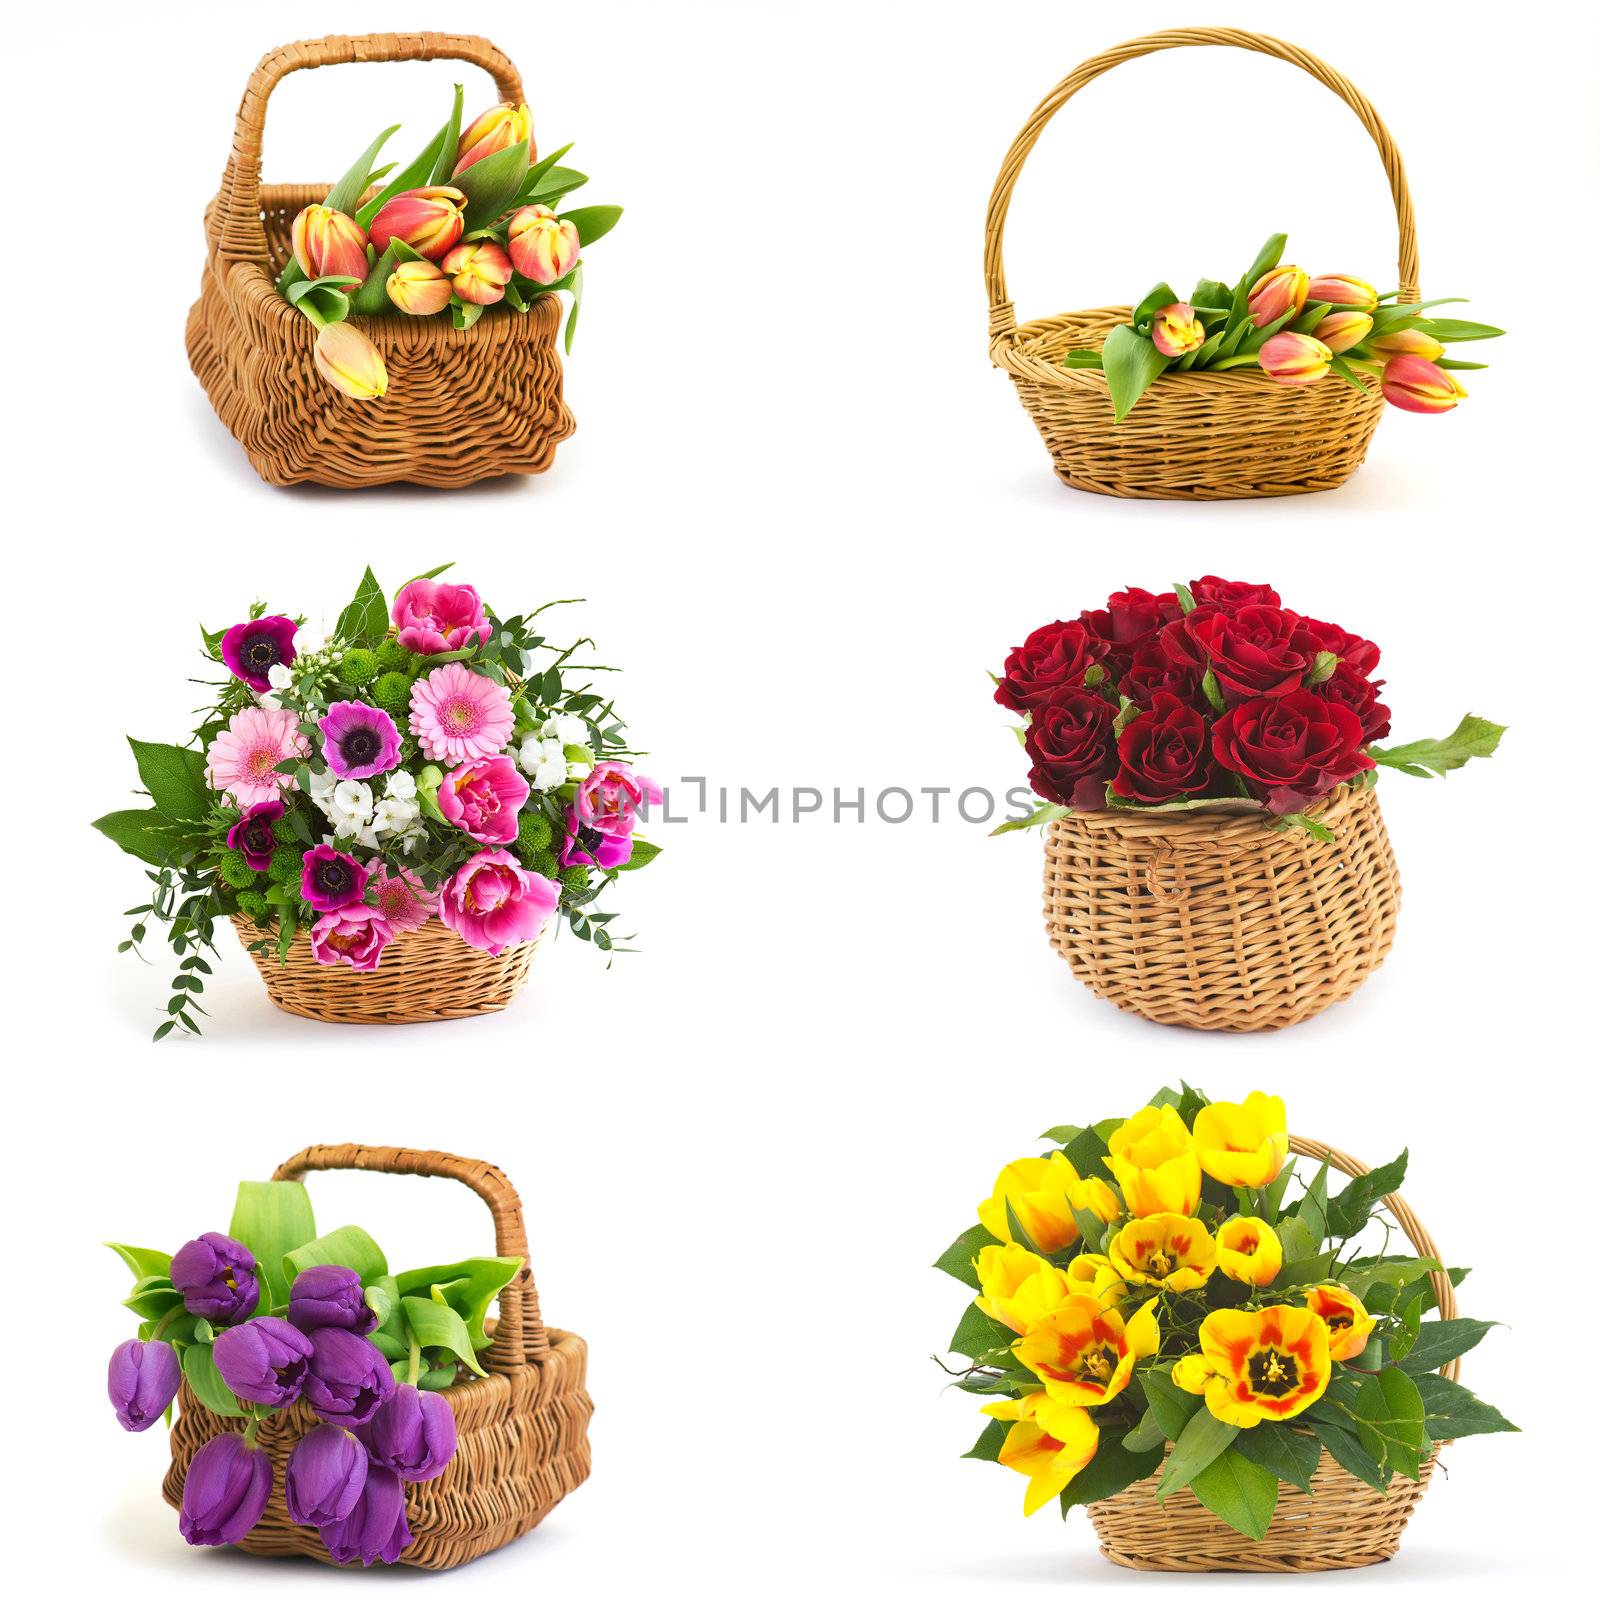 collage of six photos of bouquets of flowers by miradrozdowski